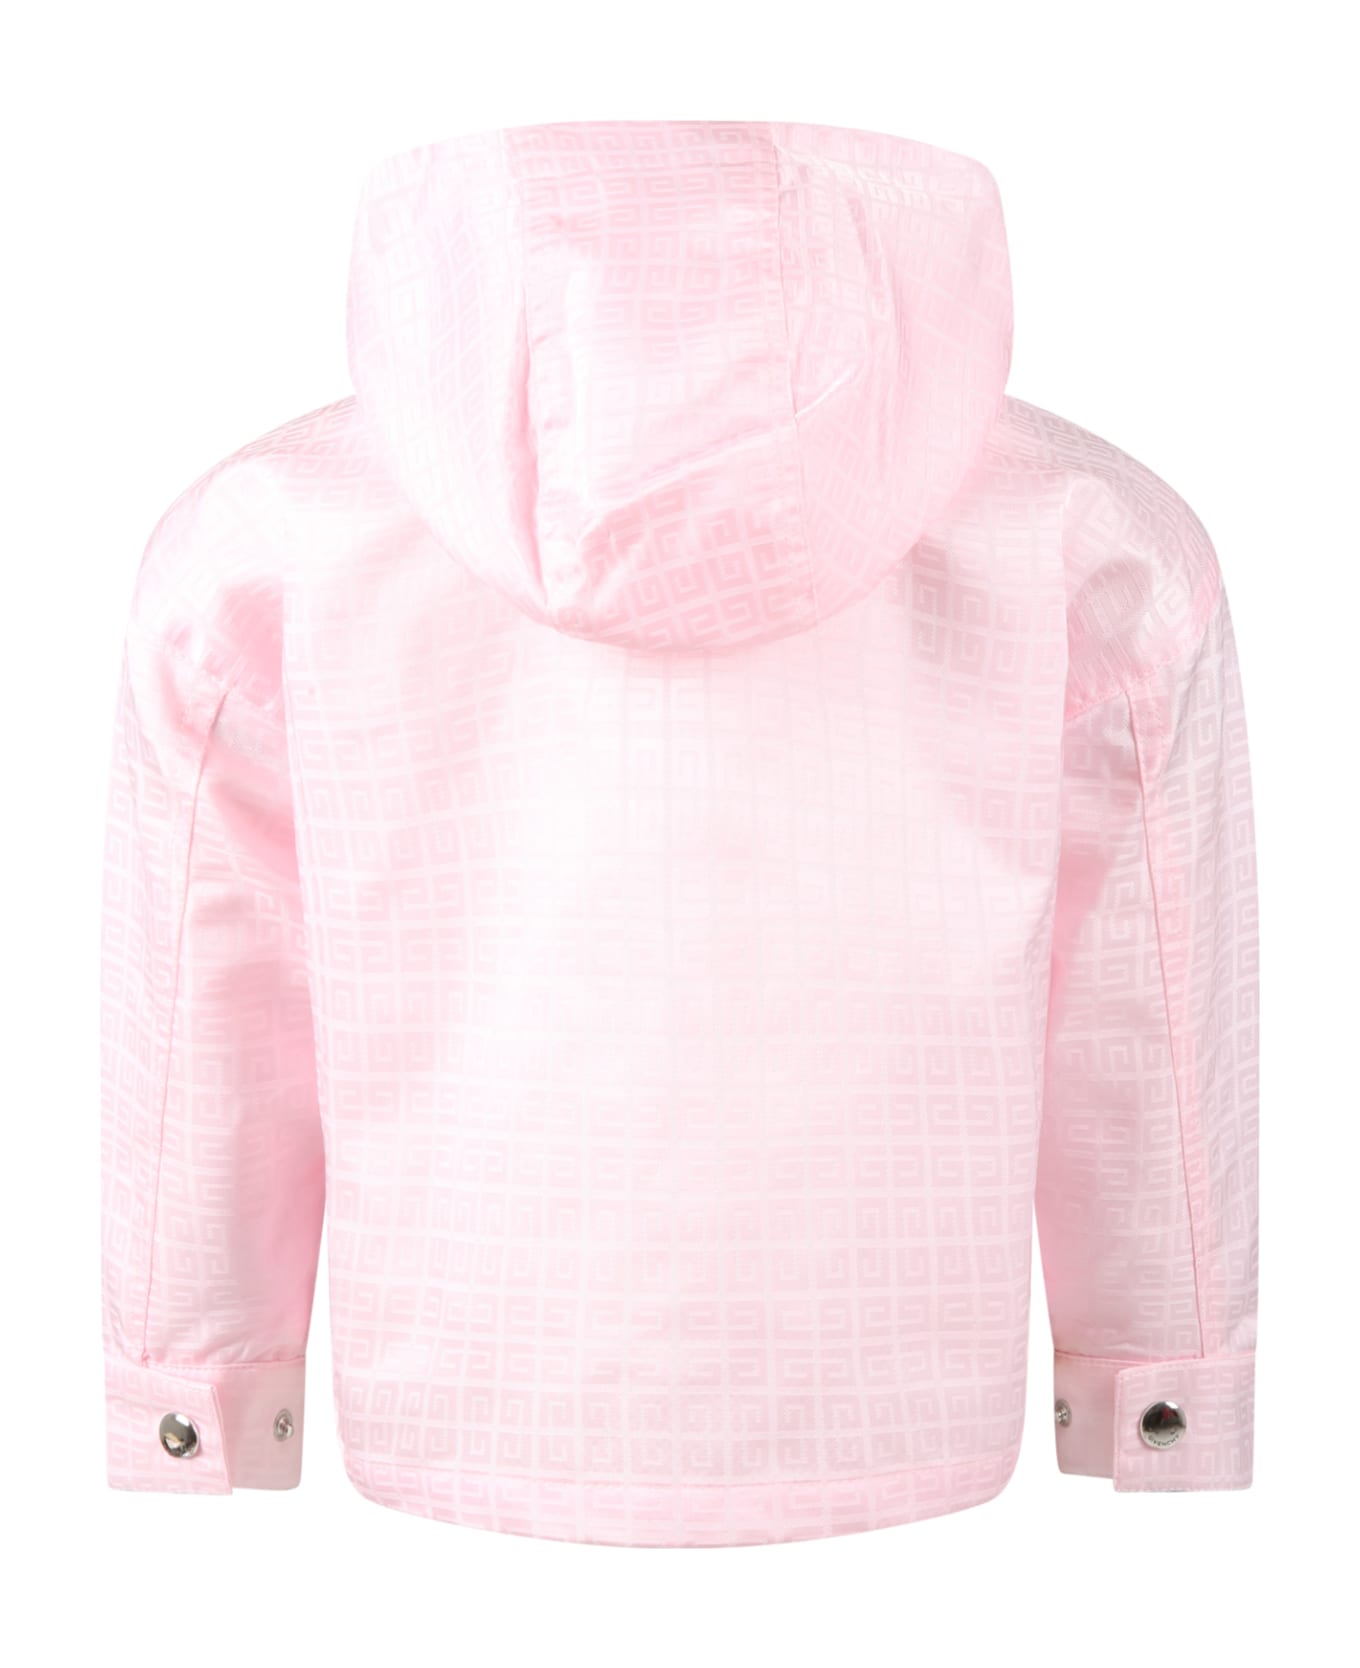 Givenchy Pink Jacket For Girl With Black Logo - Pink